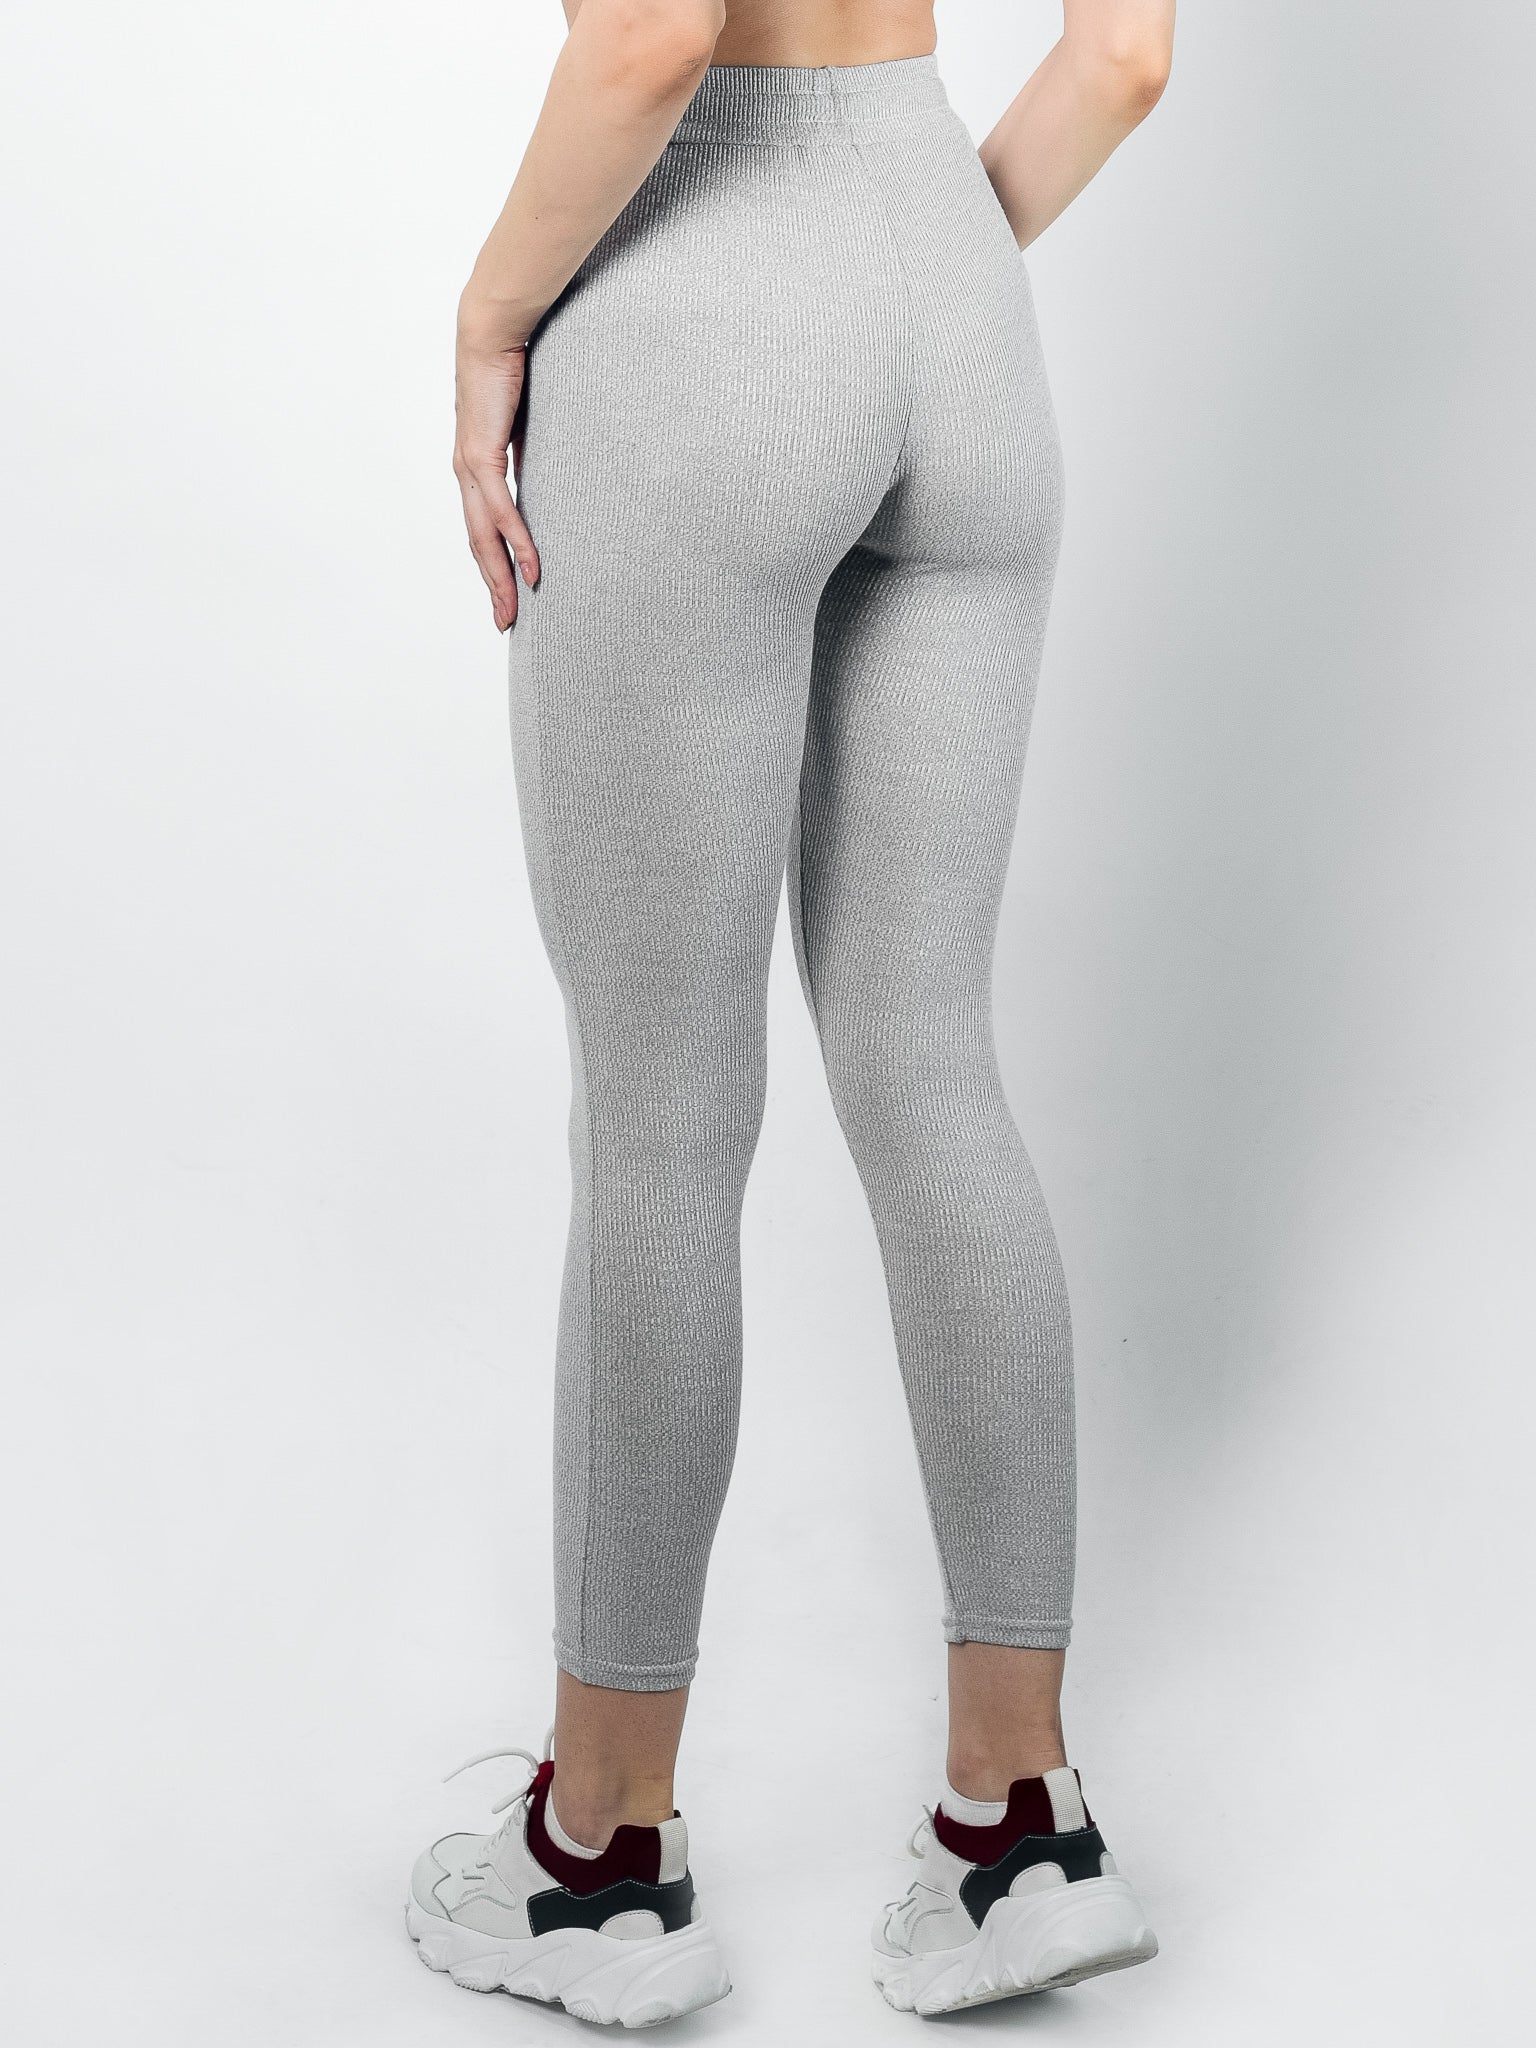 Airweave Tights - Silver